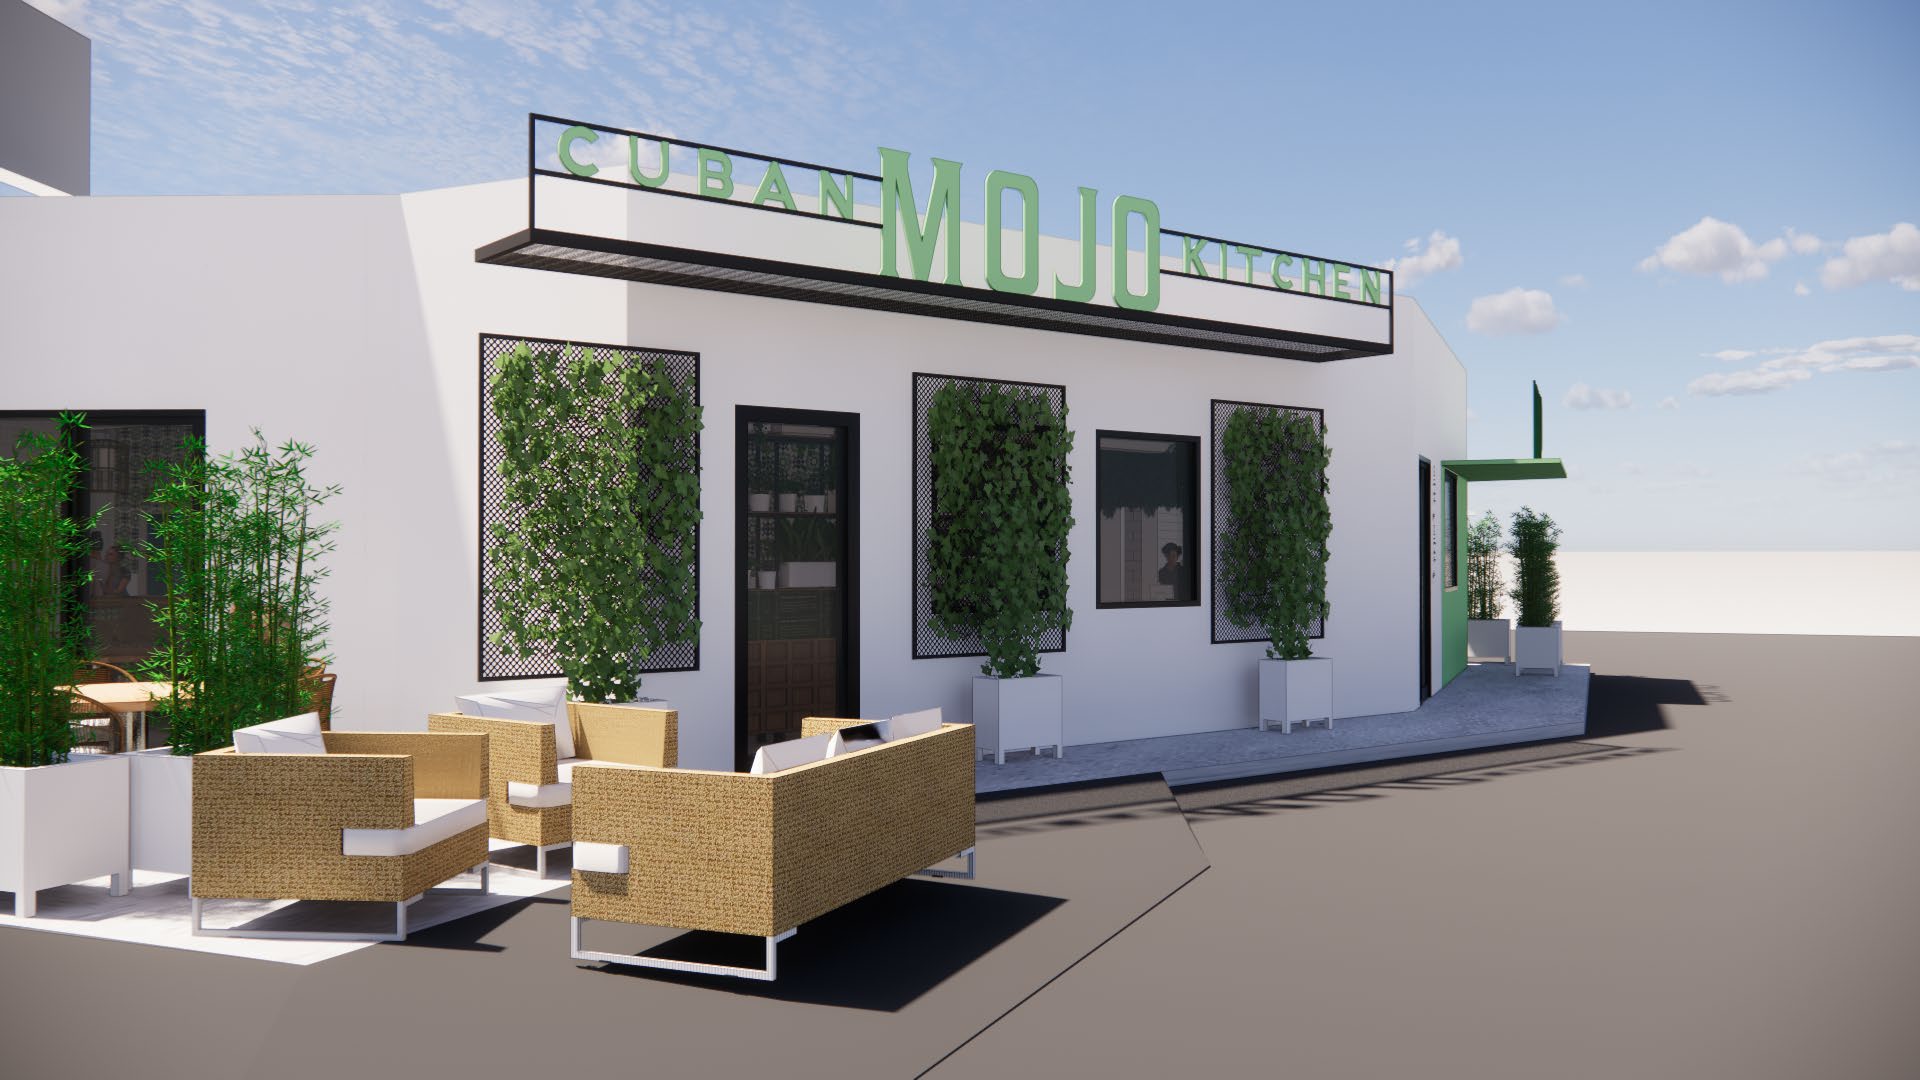 Mojo Cuban Kitchen & Rum Bar to open its midtown oasis this summer